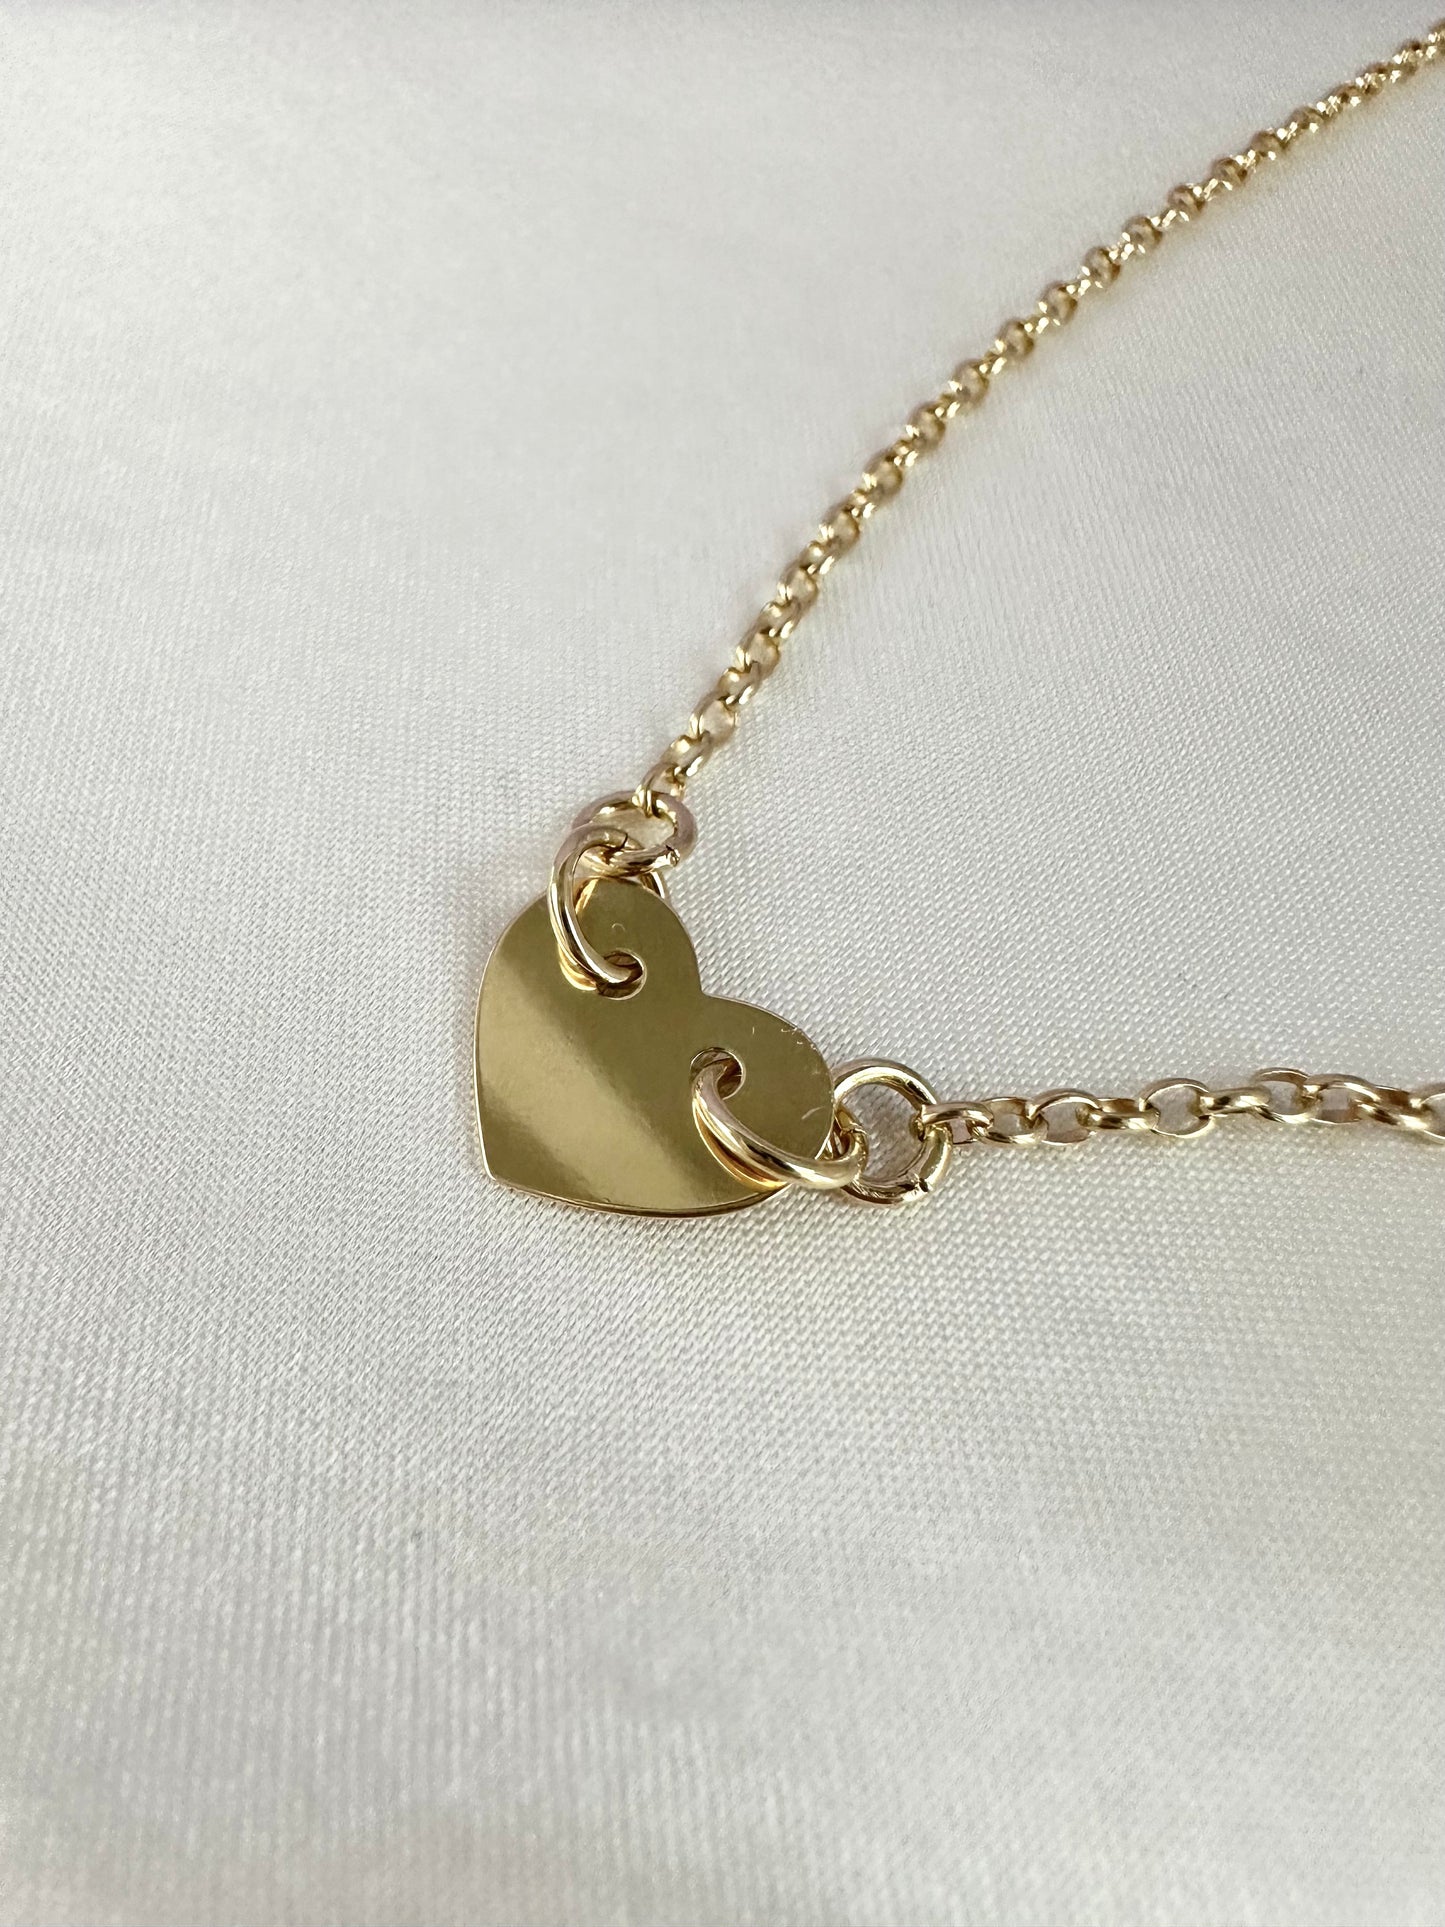 Necklace with Heart